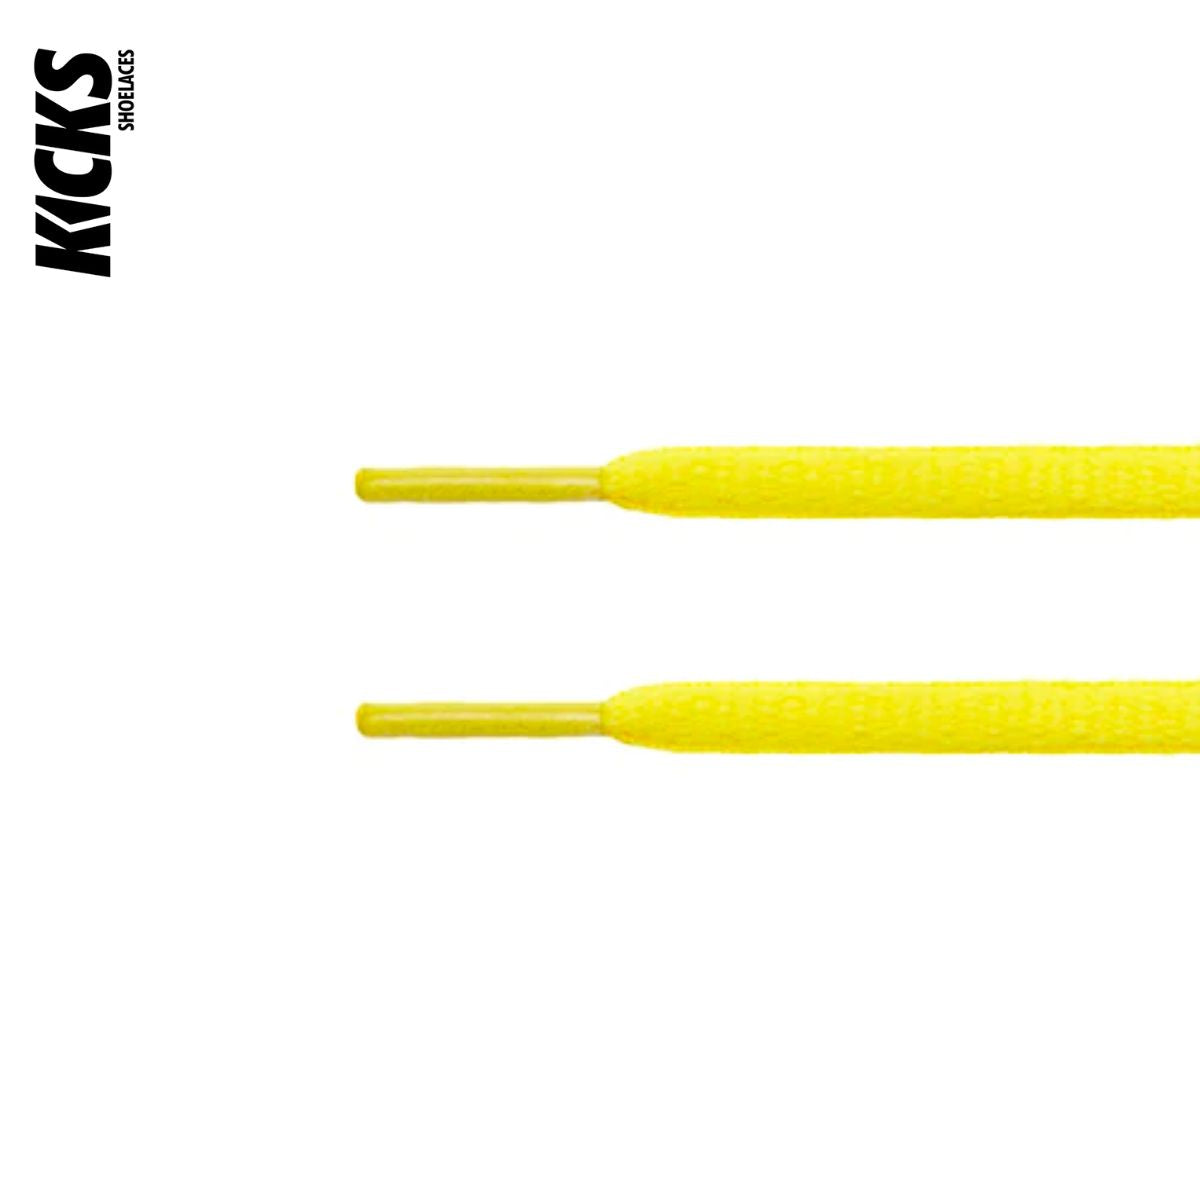 Air Max Flyknit Racer Replacement Shoelaces - Kicks Shoelaces